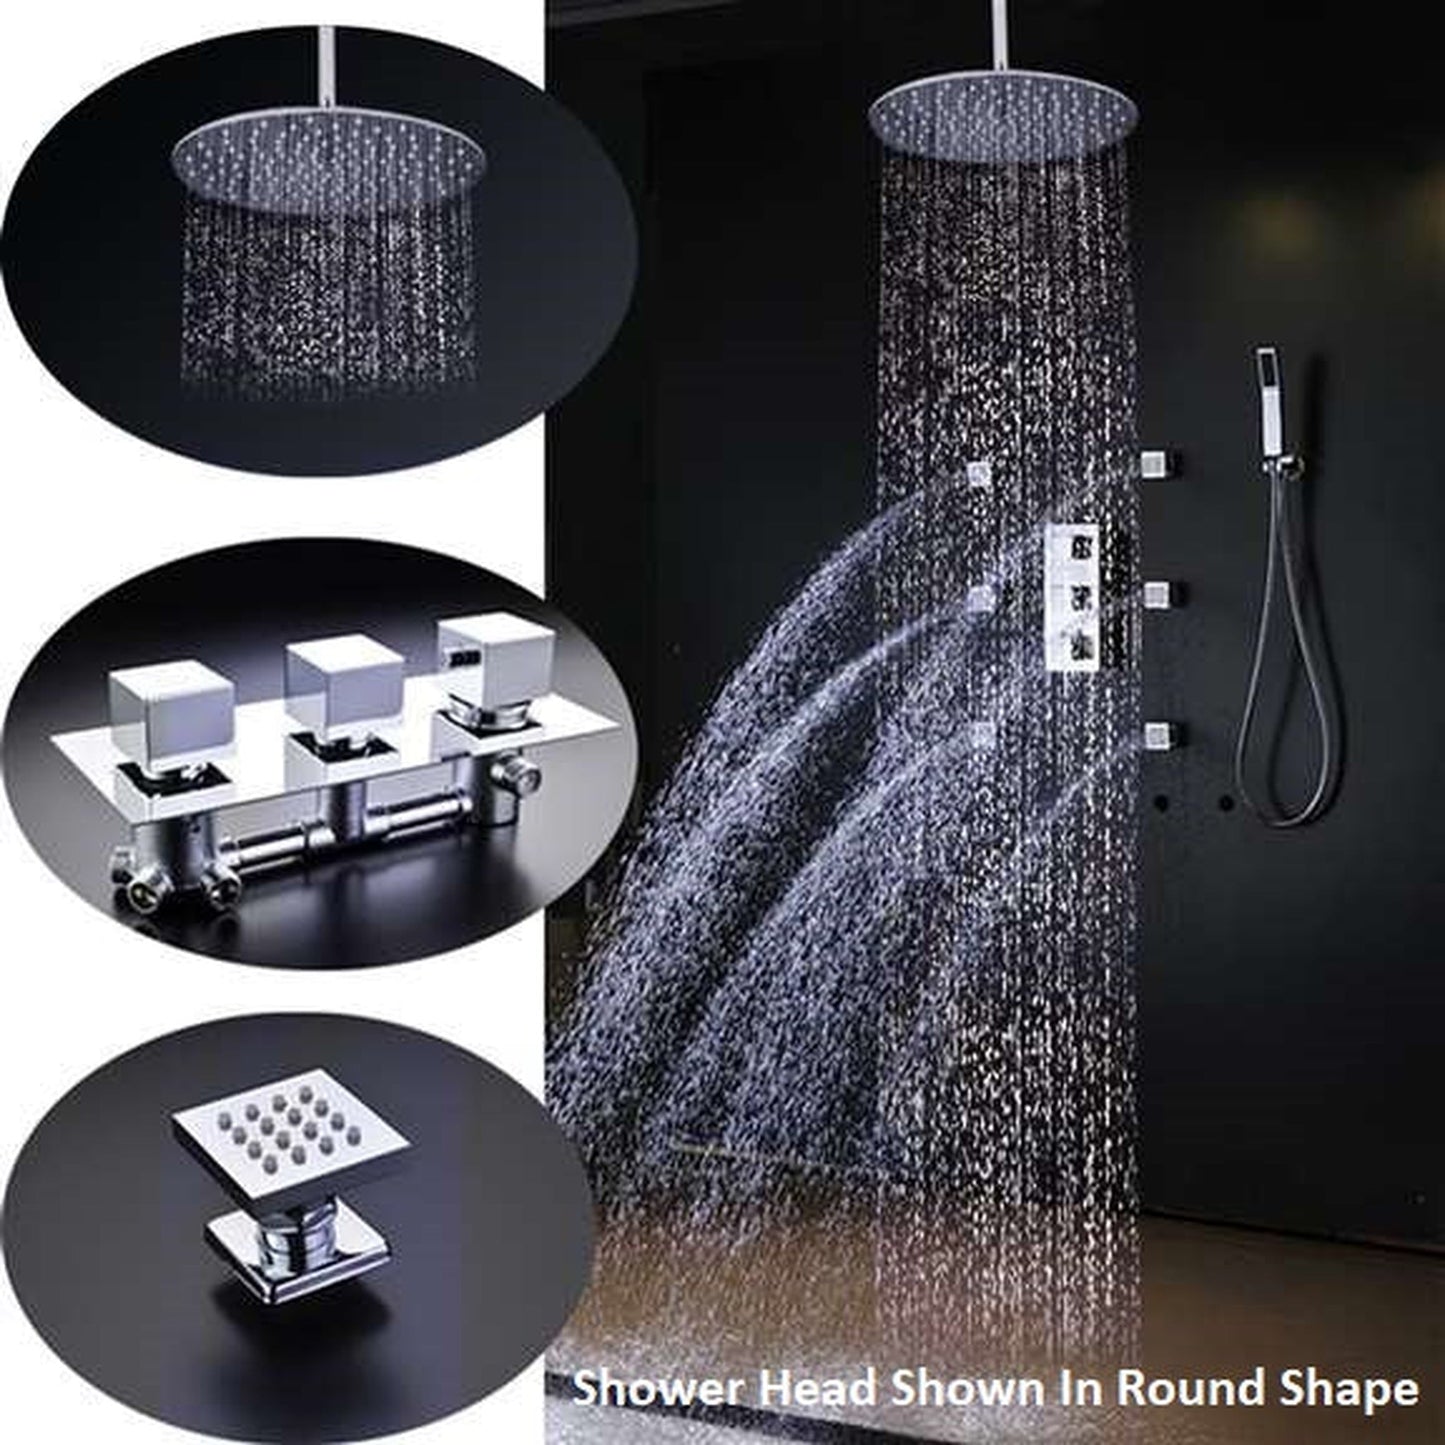 FontanaShowers Atlantic Creative Luxury 24" Large Chrome Square Ceiling Mounted Massage Shower System Without Water Powered LED Lights, 6-Jet Body Sprays and Hand Shower